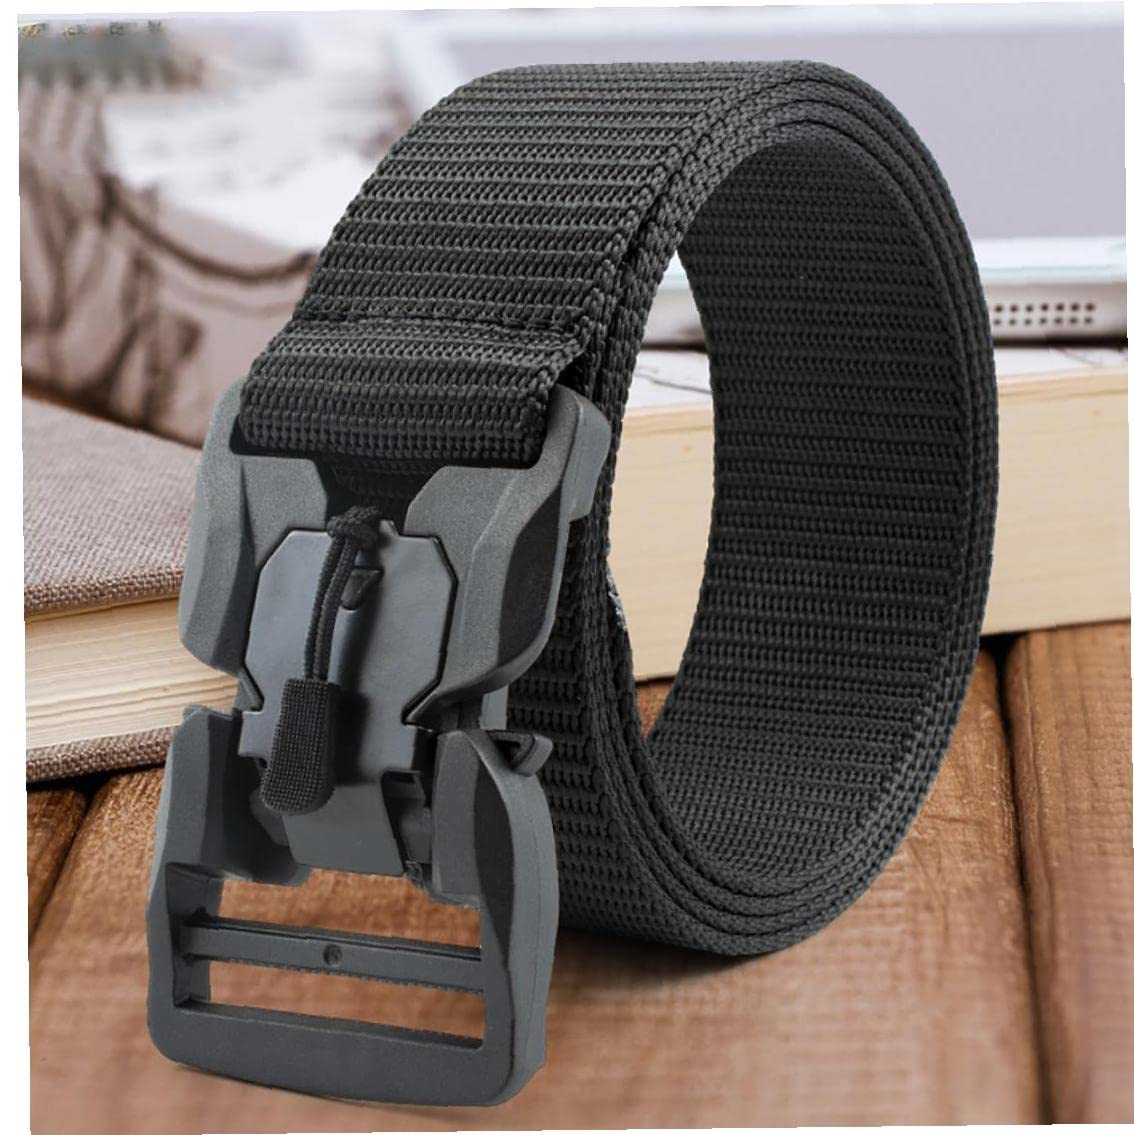 Belt Abs Resin Quick Release Magnetic Buckle Military Belt Soft Genuine Nylon Sports Accessories for Men Women